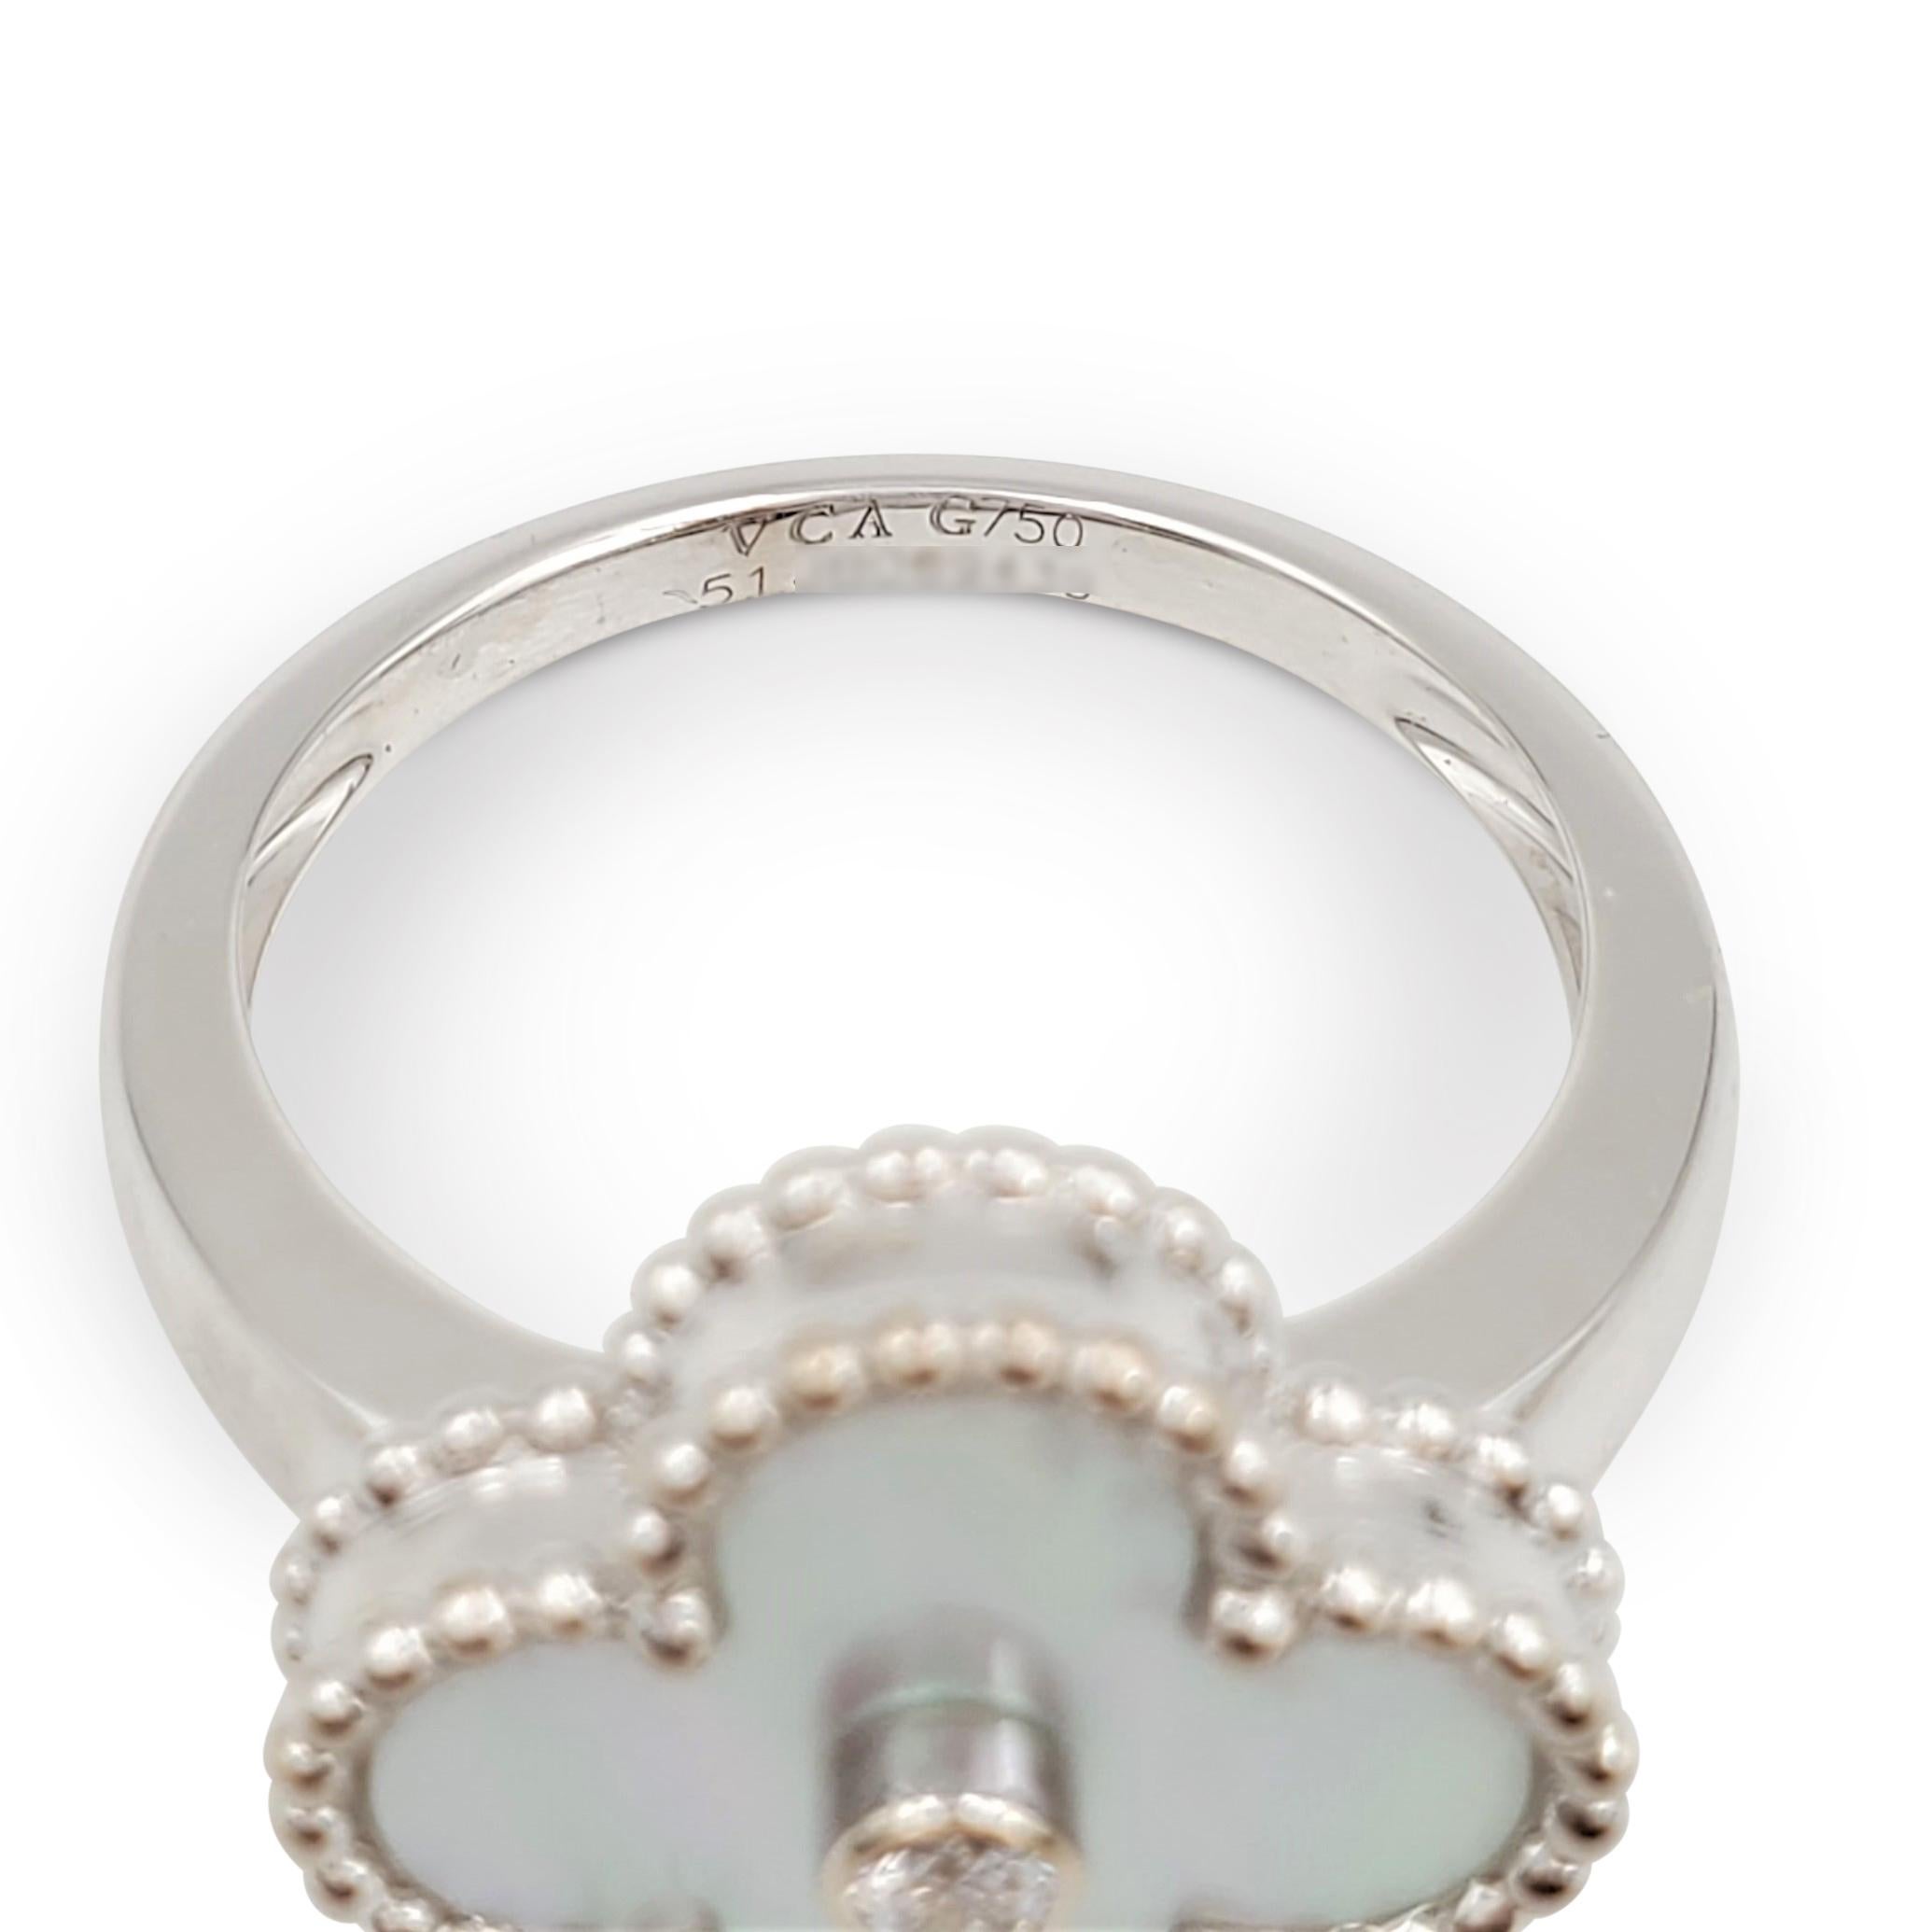 Round Cut Van Cleef & Arpels 'Vintage Alhambra' White Gold Mother of Pearl Diamond Ring